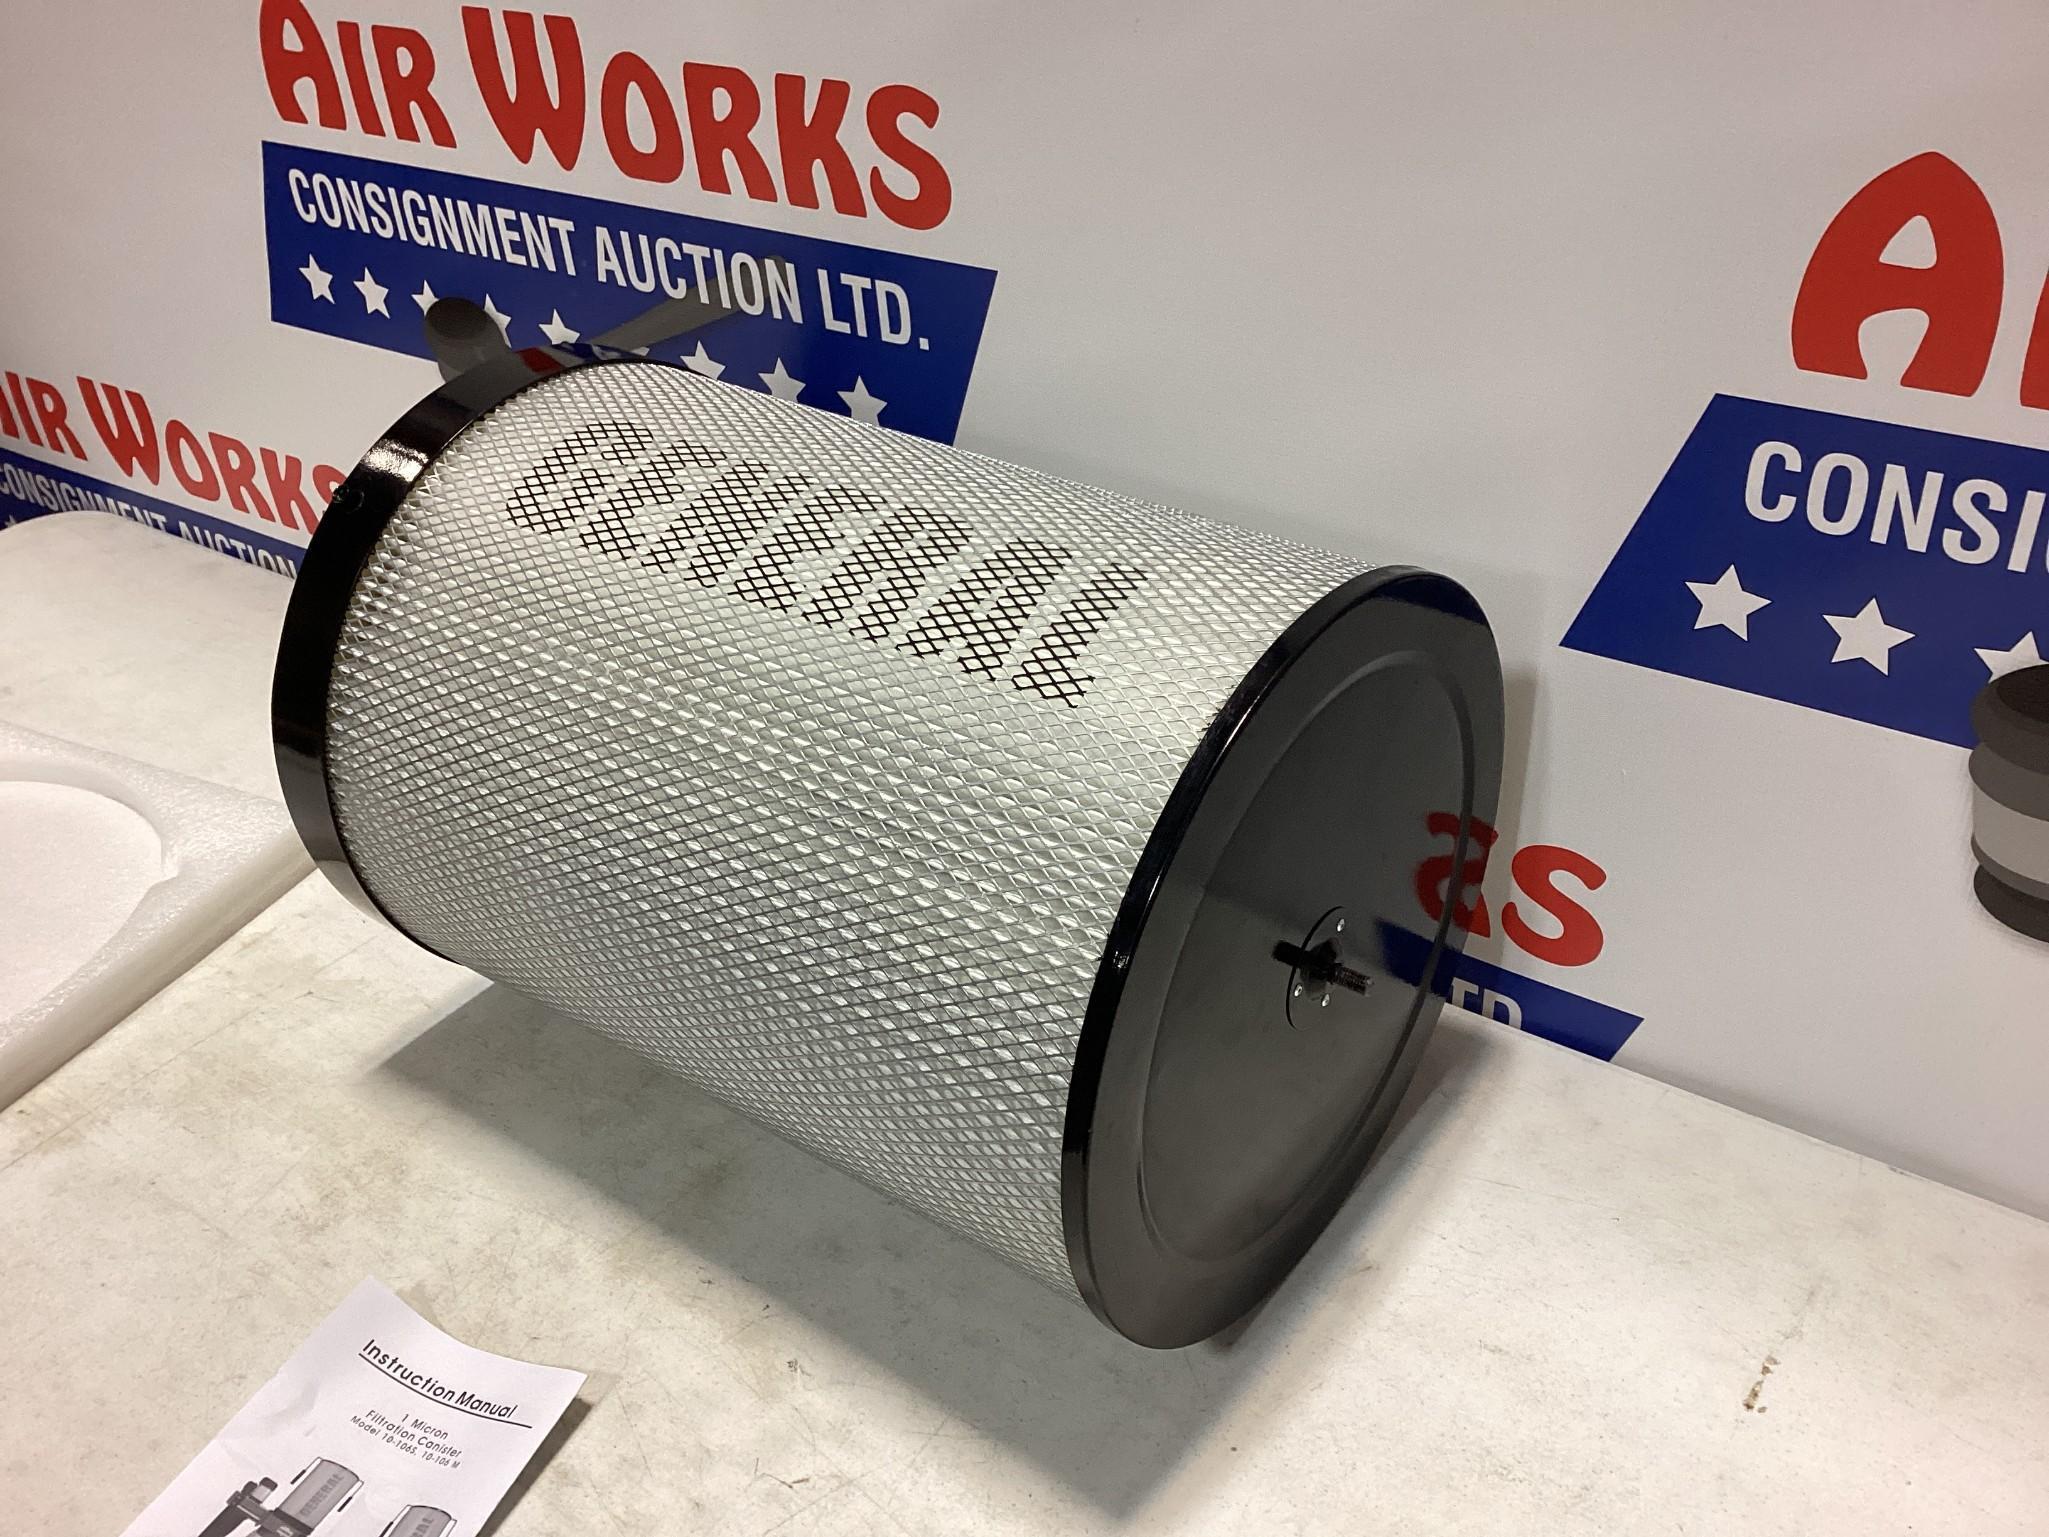 New Unused General Canister Filter for Dust Collector Model 10-106S, 10-106M